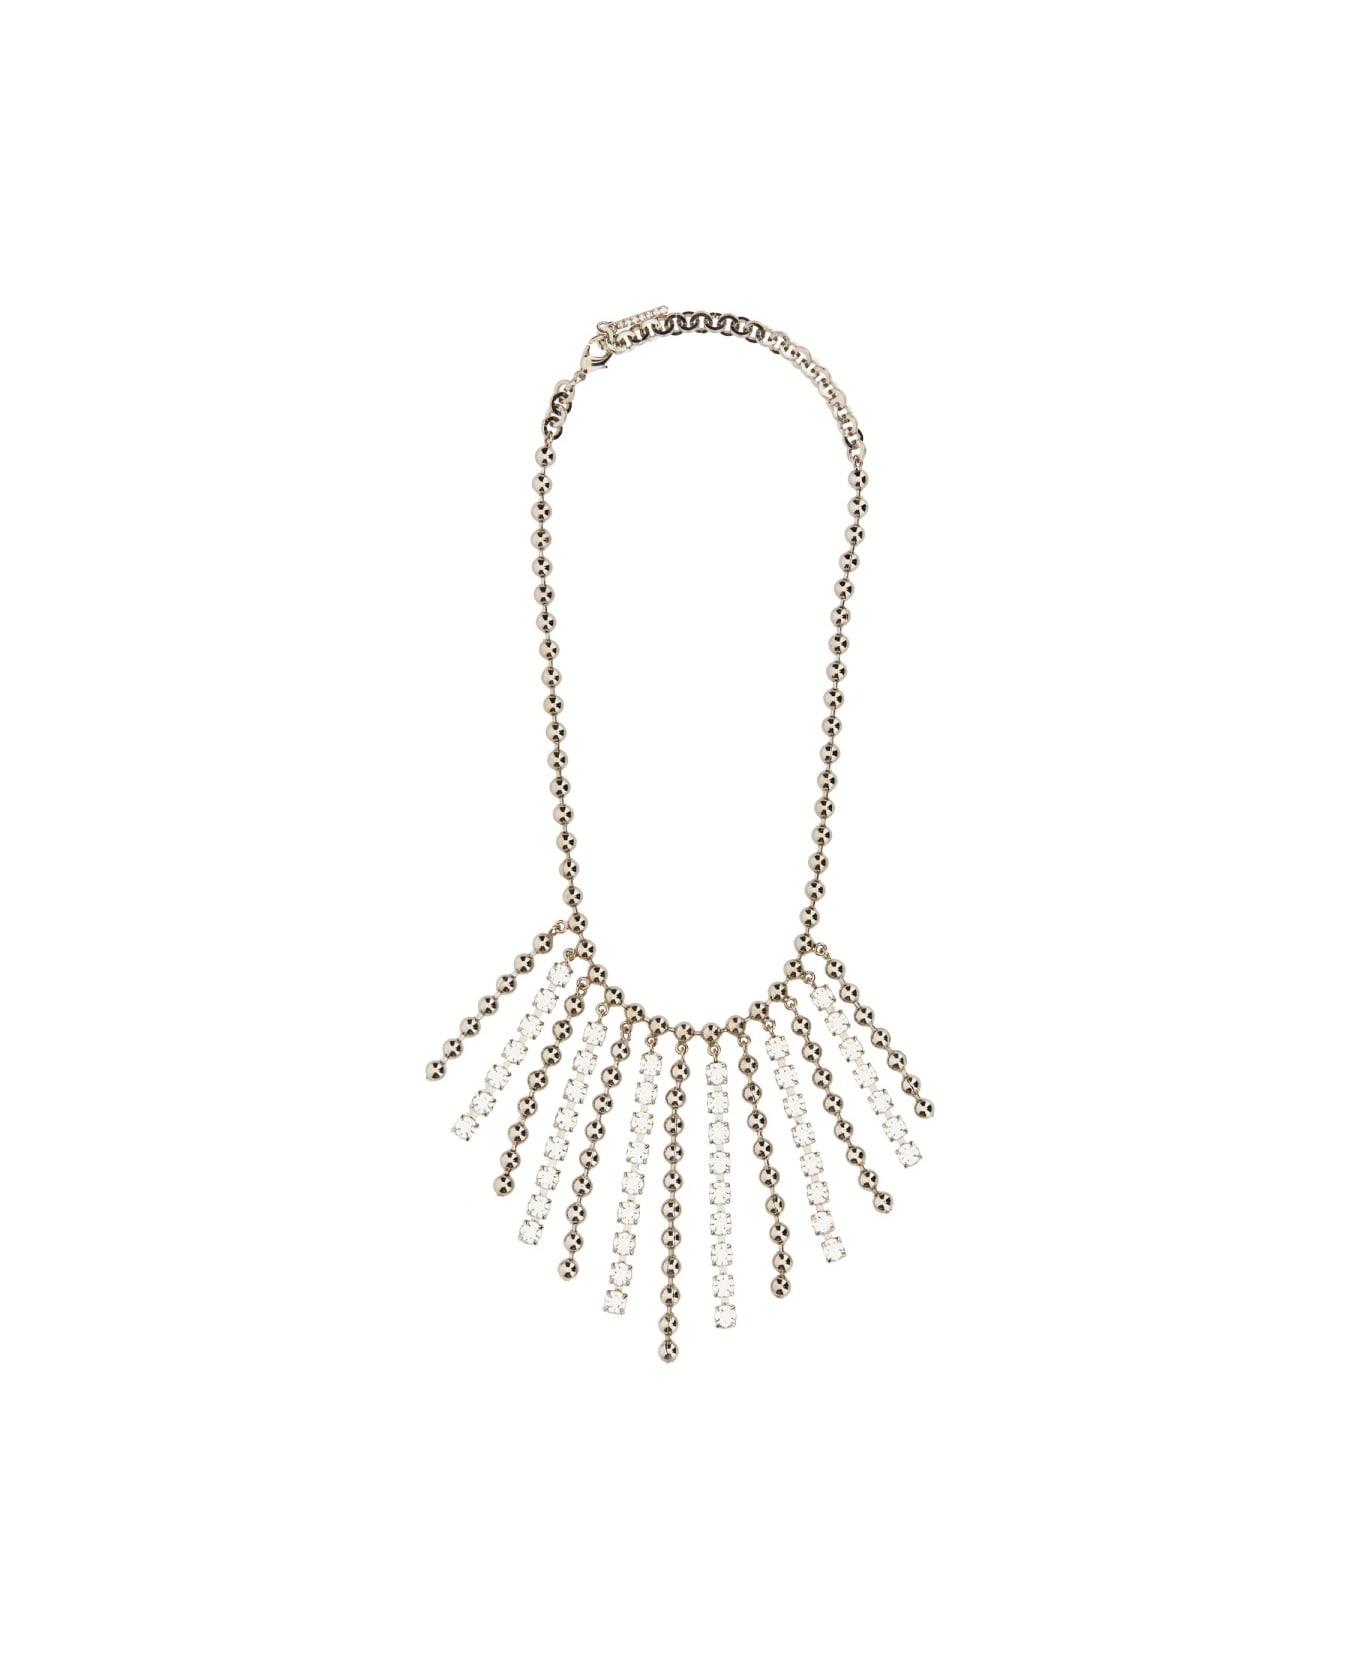 Alessandra Rich Crystal And Chain Necklace With Bangs - SILVER